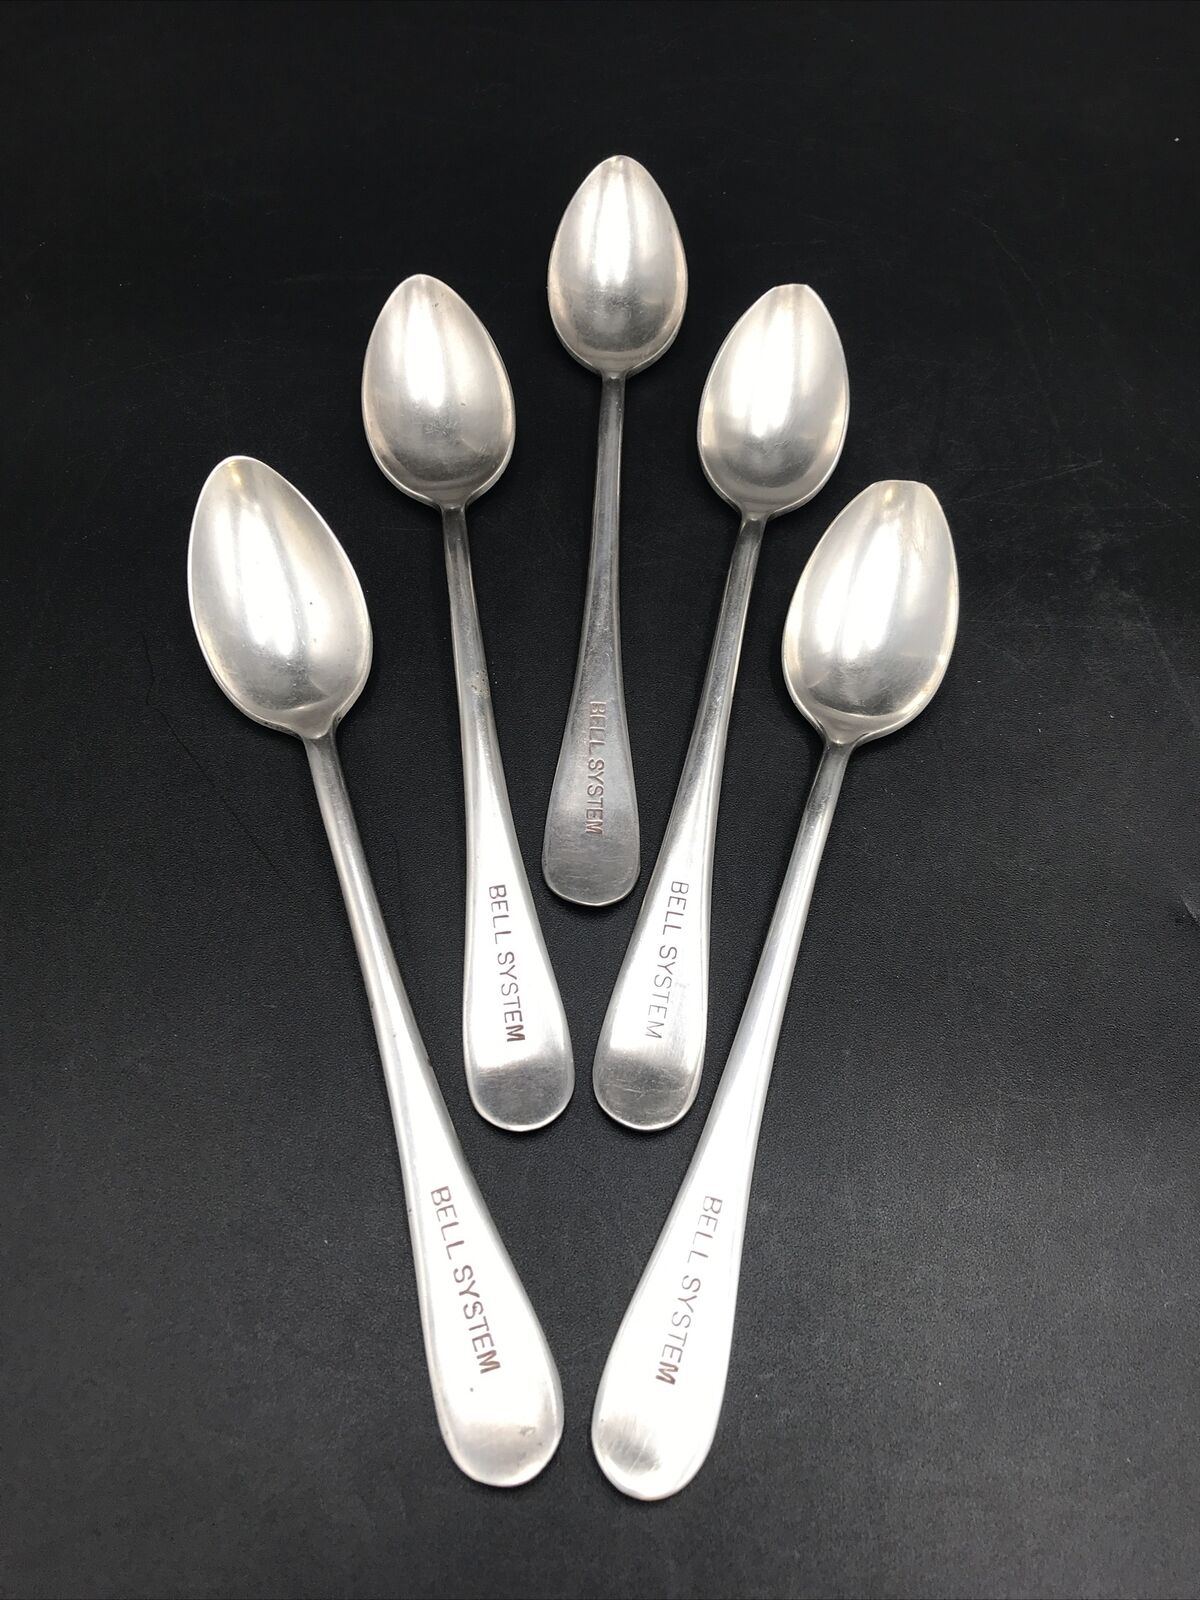 5 RARE Southwestern Bell Telephone Co Service Award Silver Spoons.